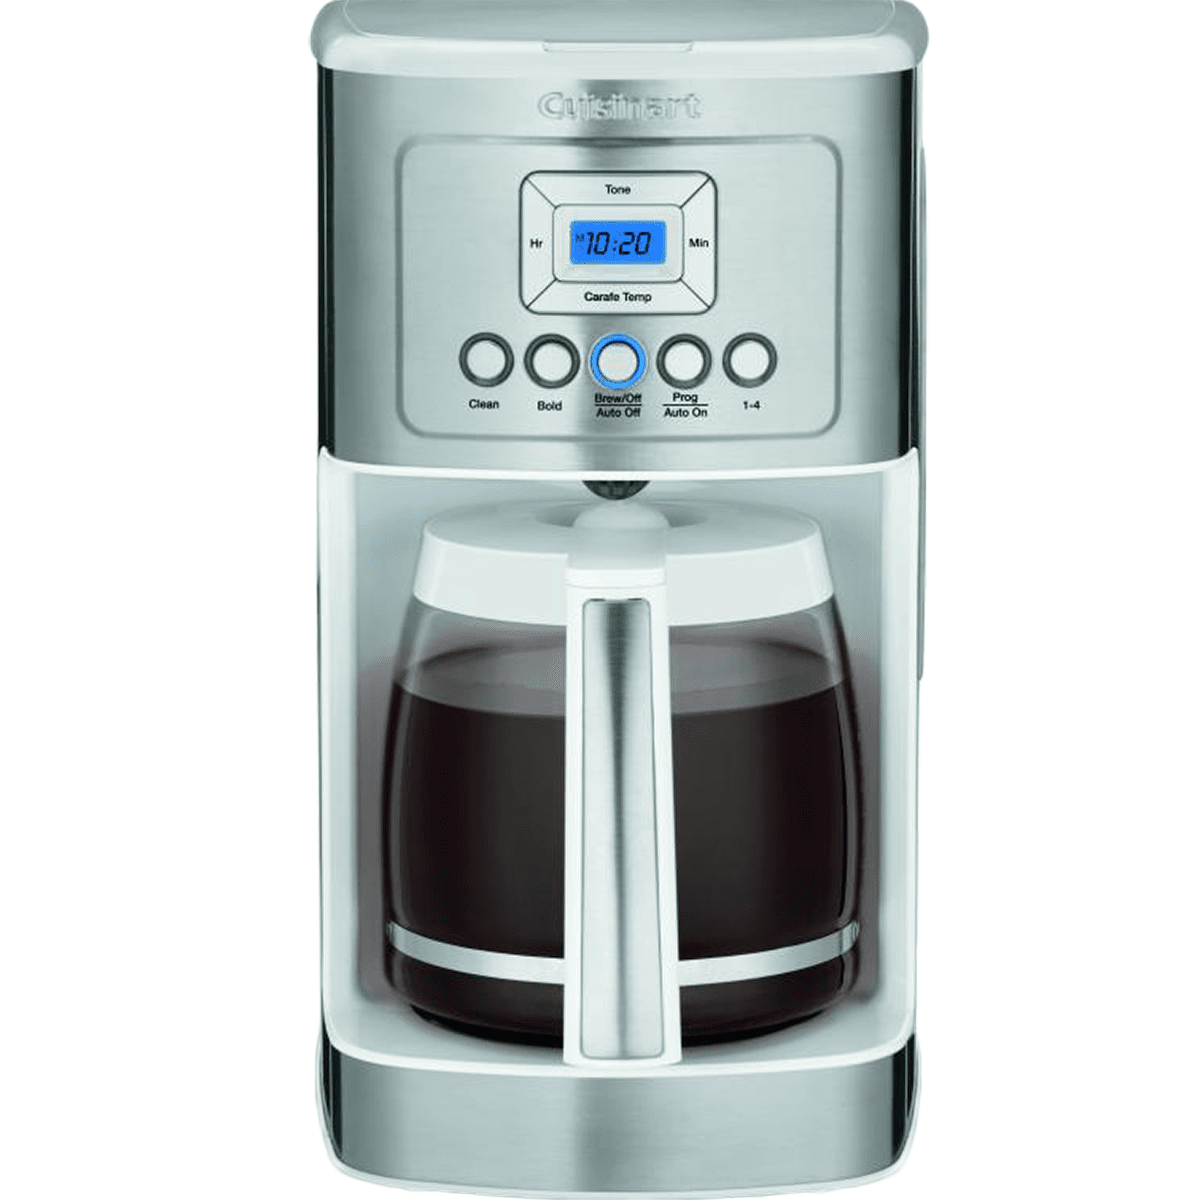 Cuisinart 14 Cup Programmable Coffee Maker - White (dcc-3200w)